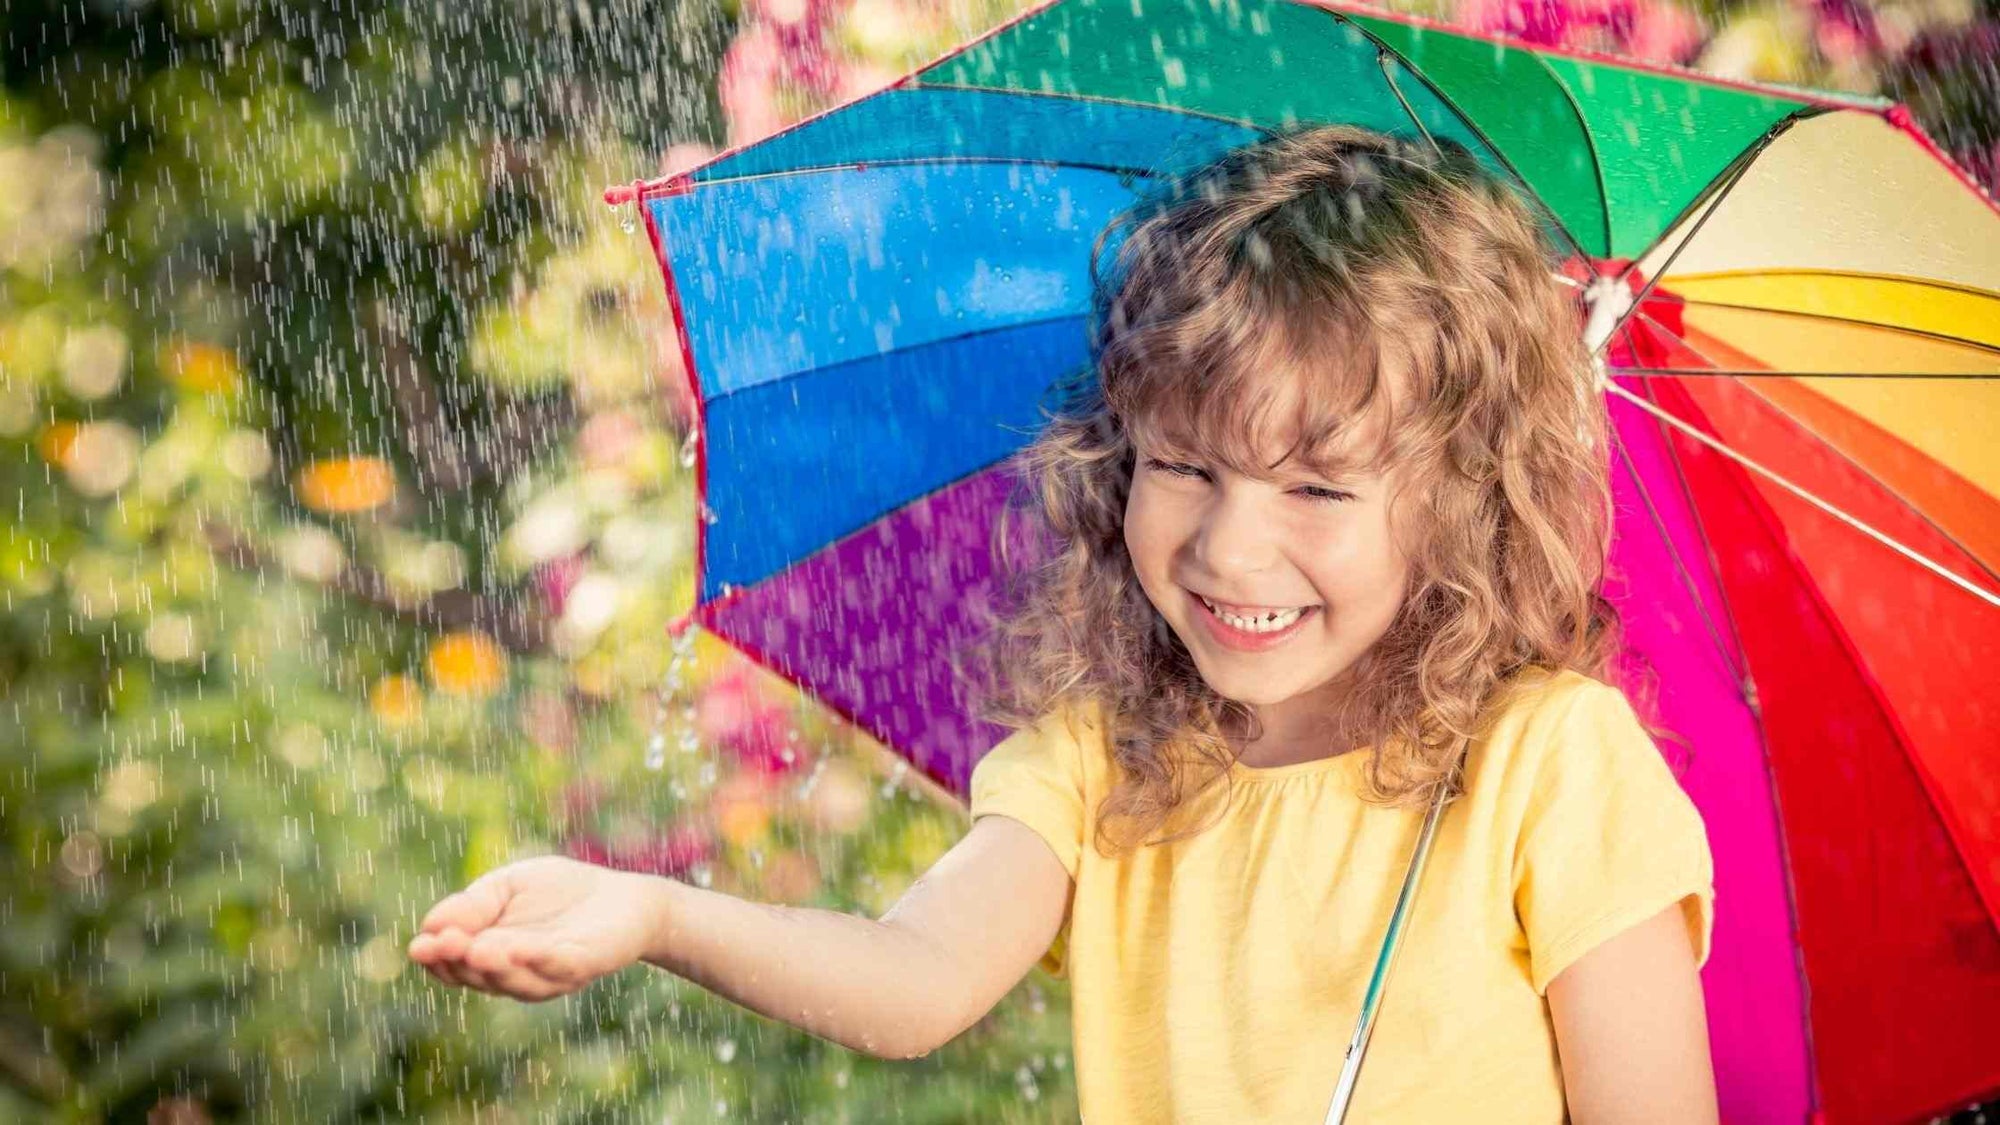 5 healthy plans for rainy days